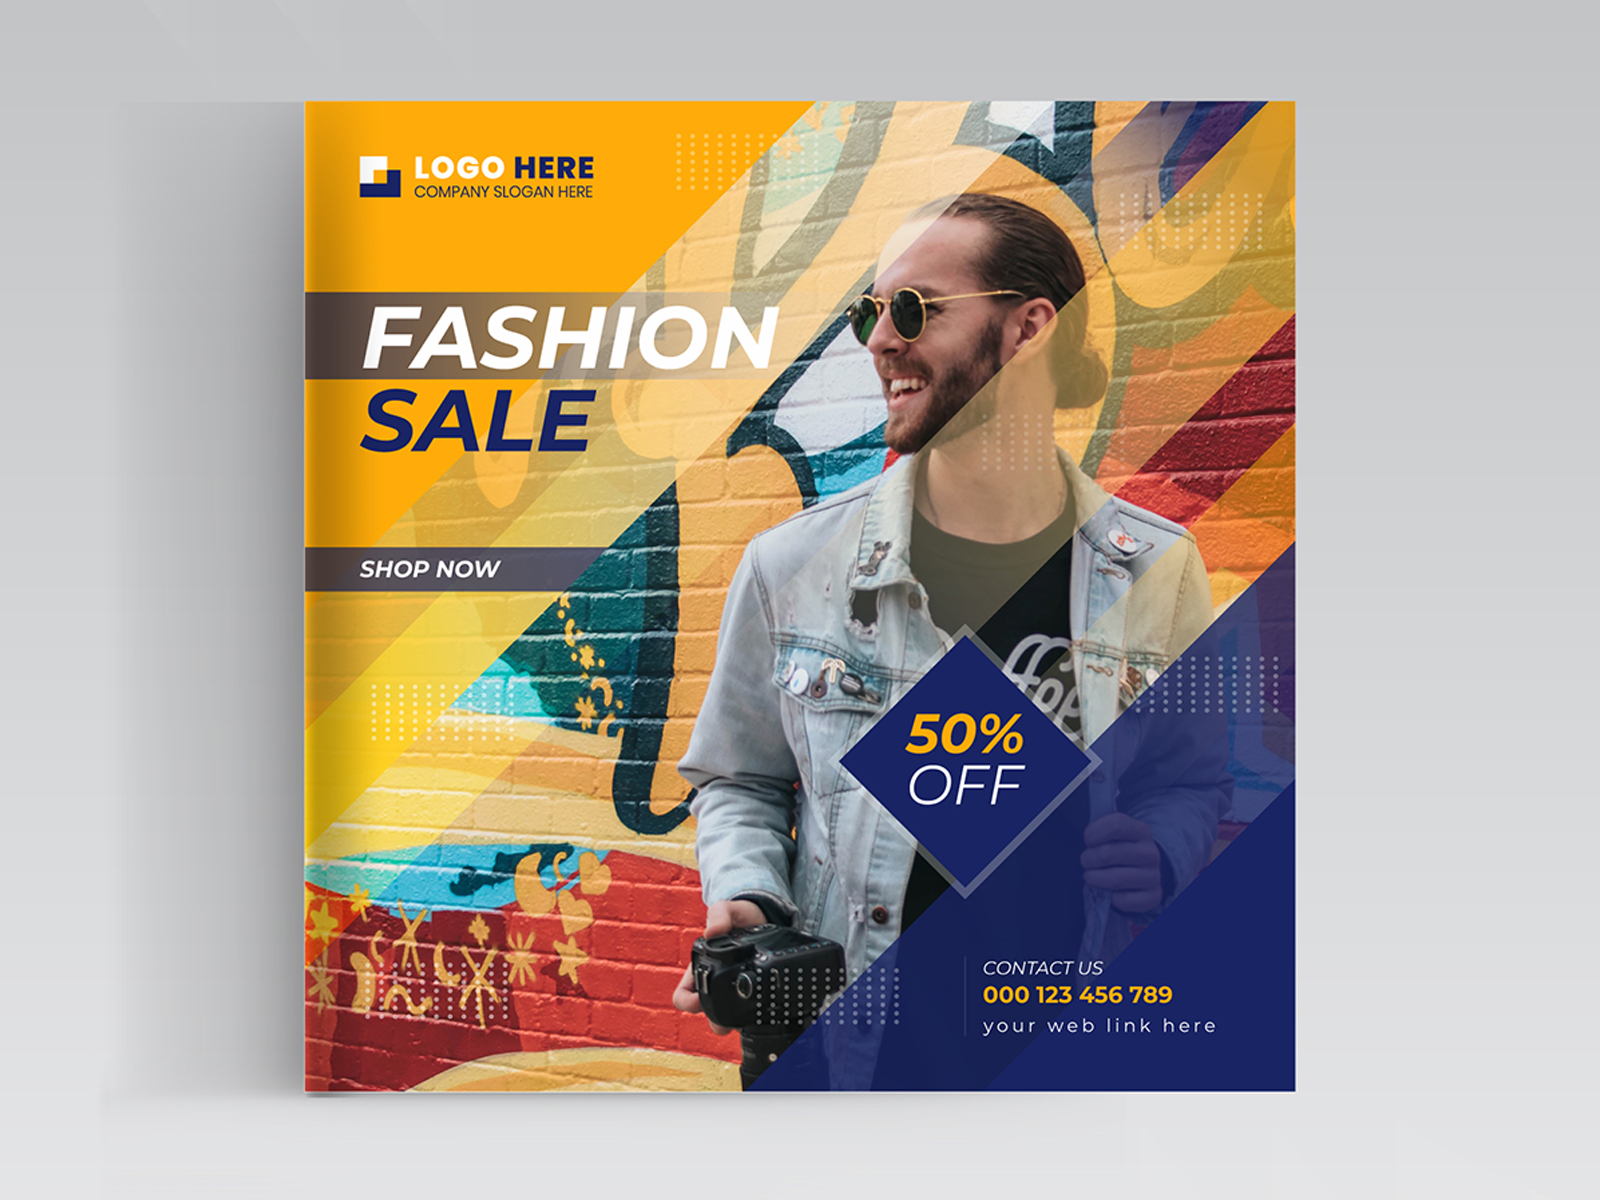 Fashion sale social media post templates design by pikartist on Dribbble